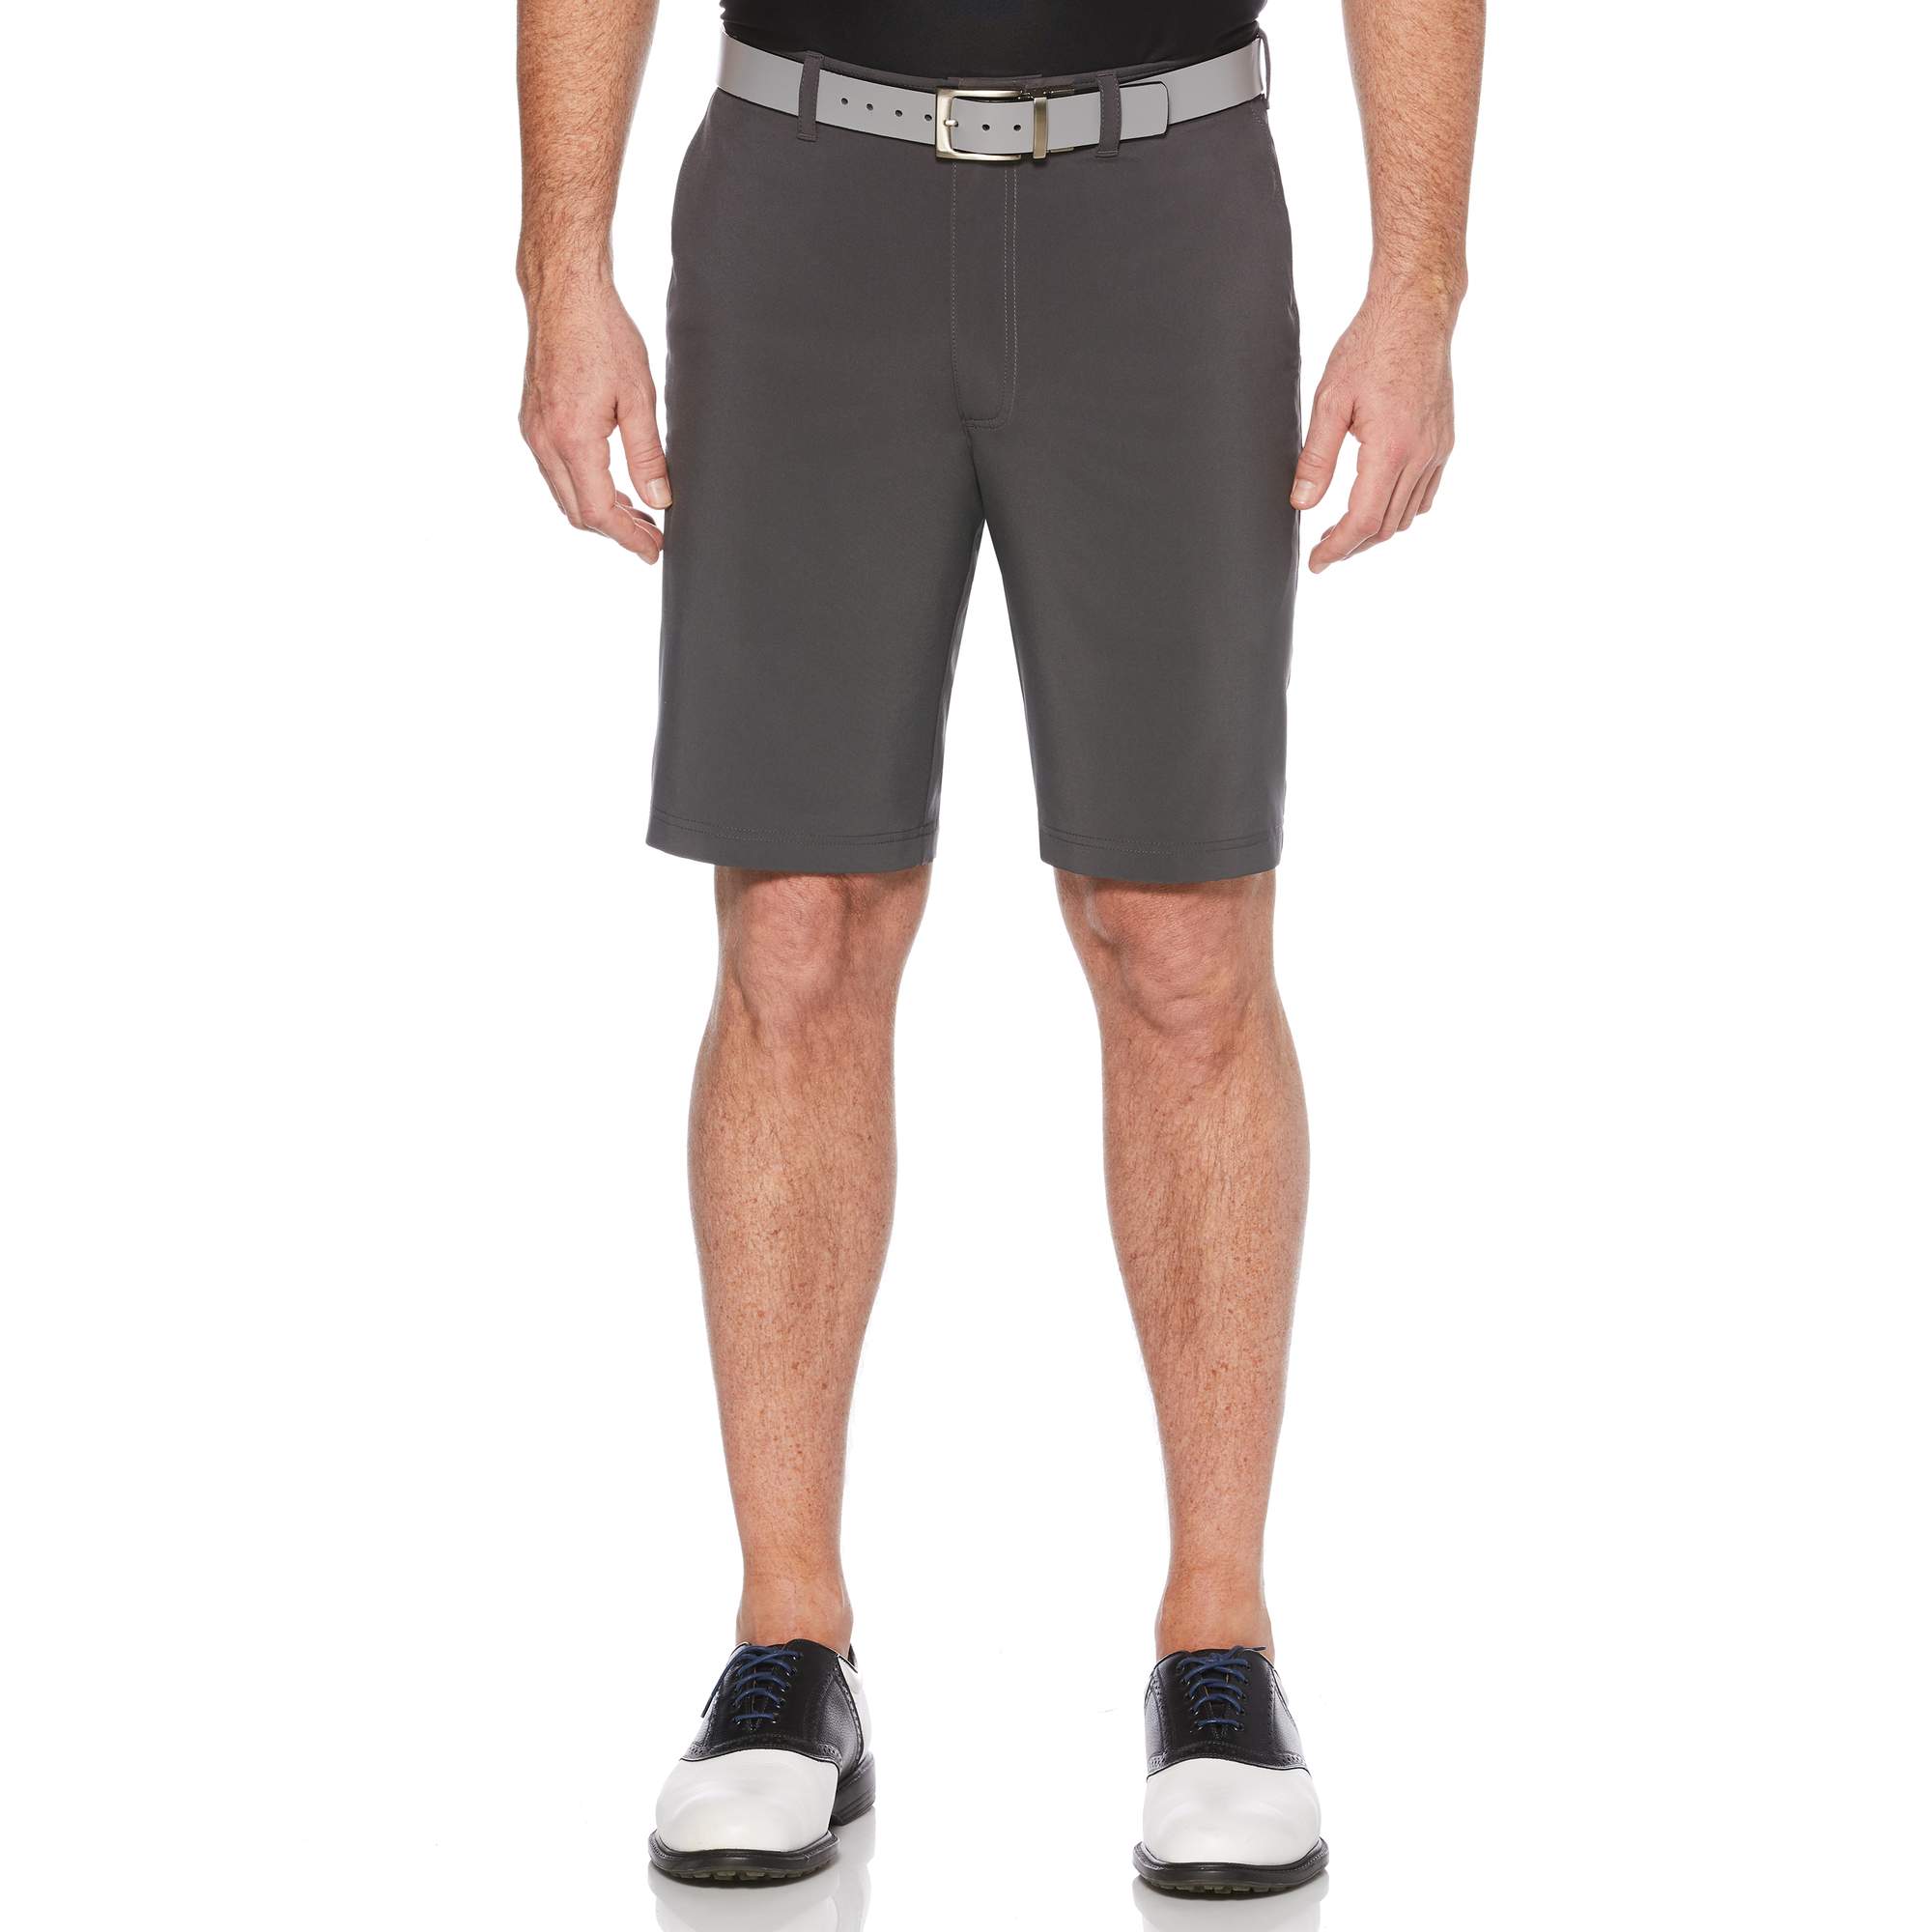 Ben Hogan Performance Men's Flat Front Active Flex Stretch Golf Short, up to 54 inches - image 1 of 5